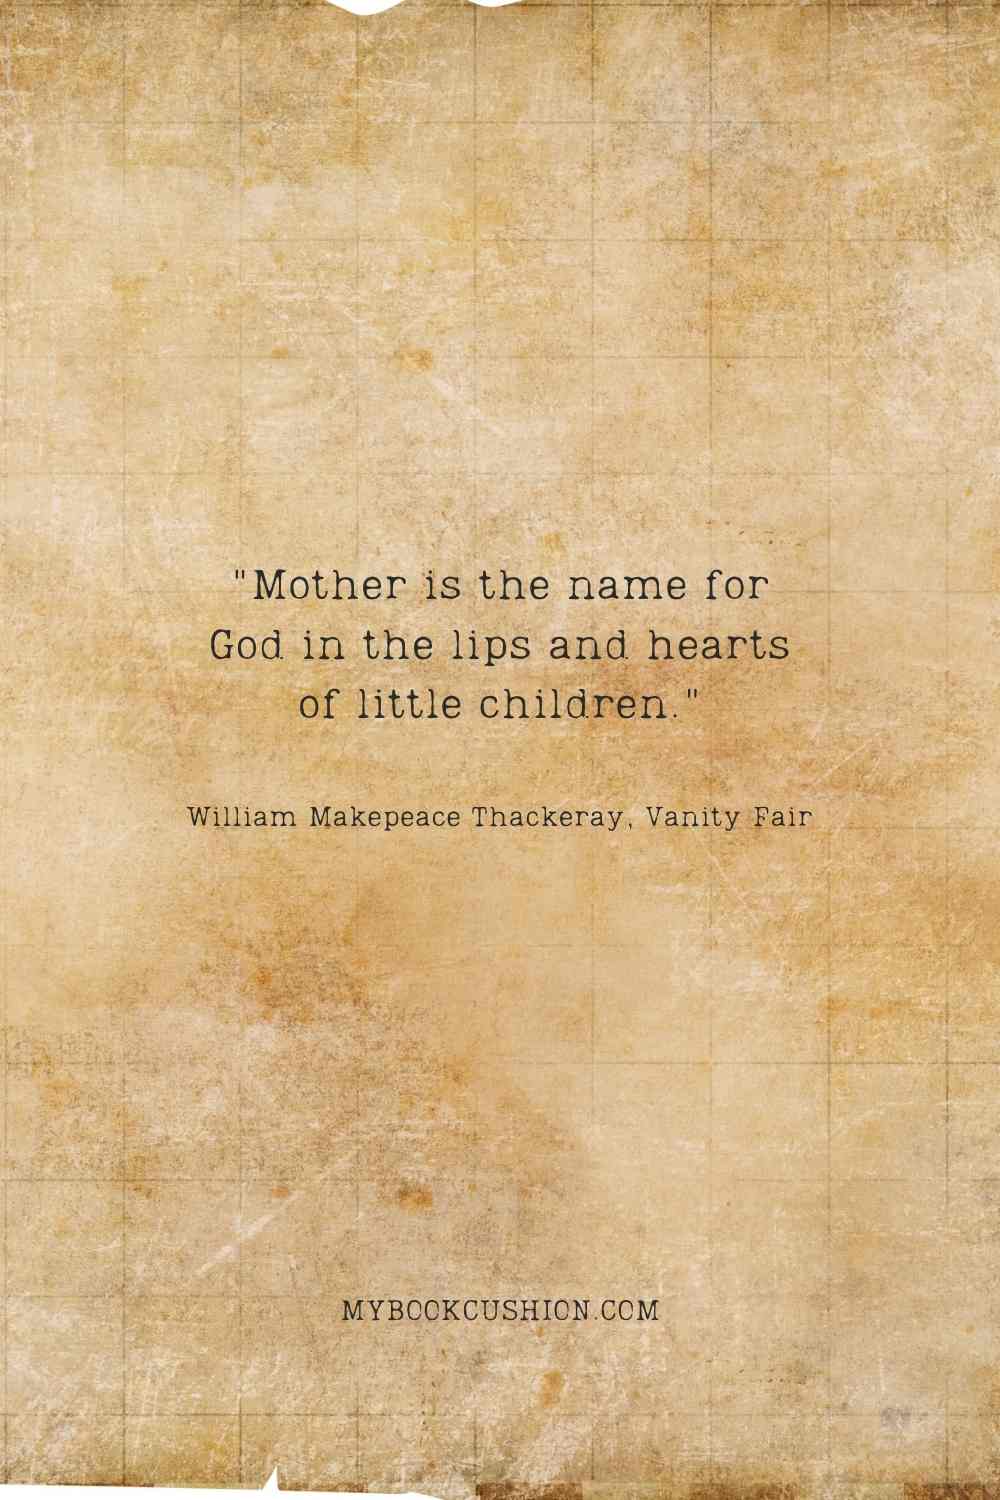 Mother is the name for God in the lips and hearts of little children. - William Makepeace Thackeray, Vanity Fair